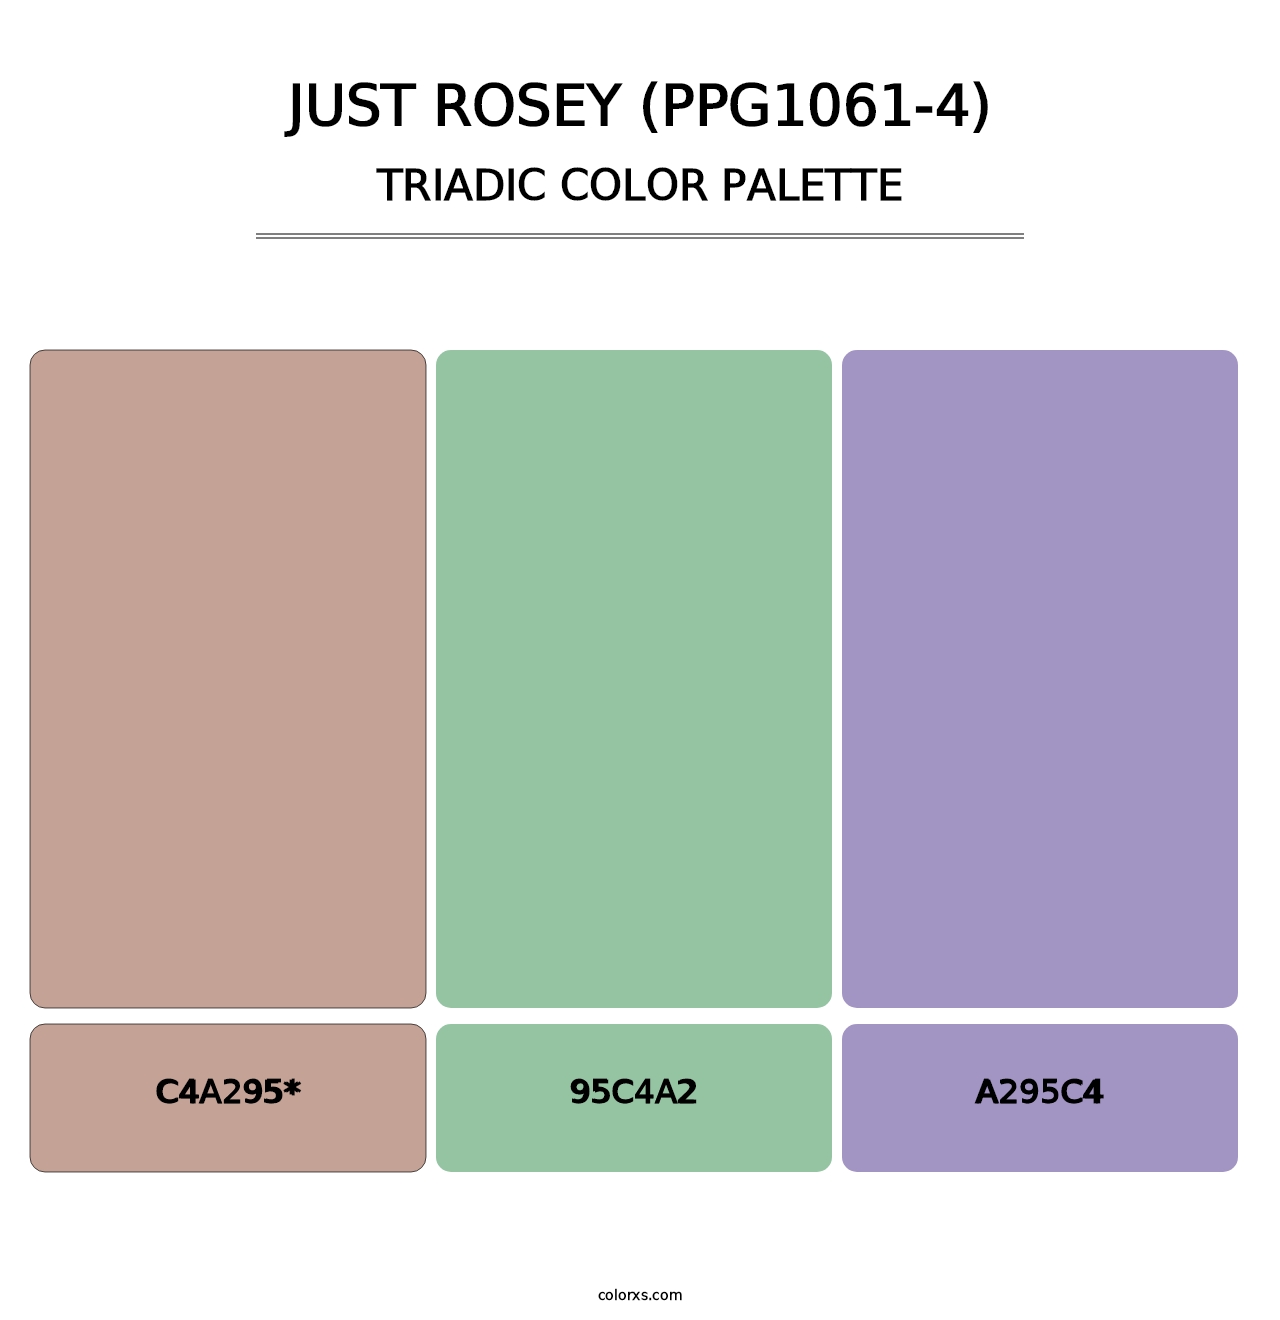 Just Rosey (PPG1061-4) - Triadic Color Palette